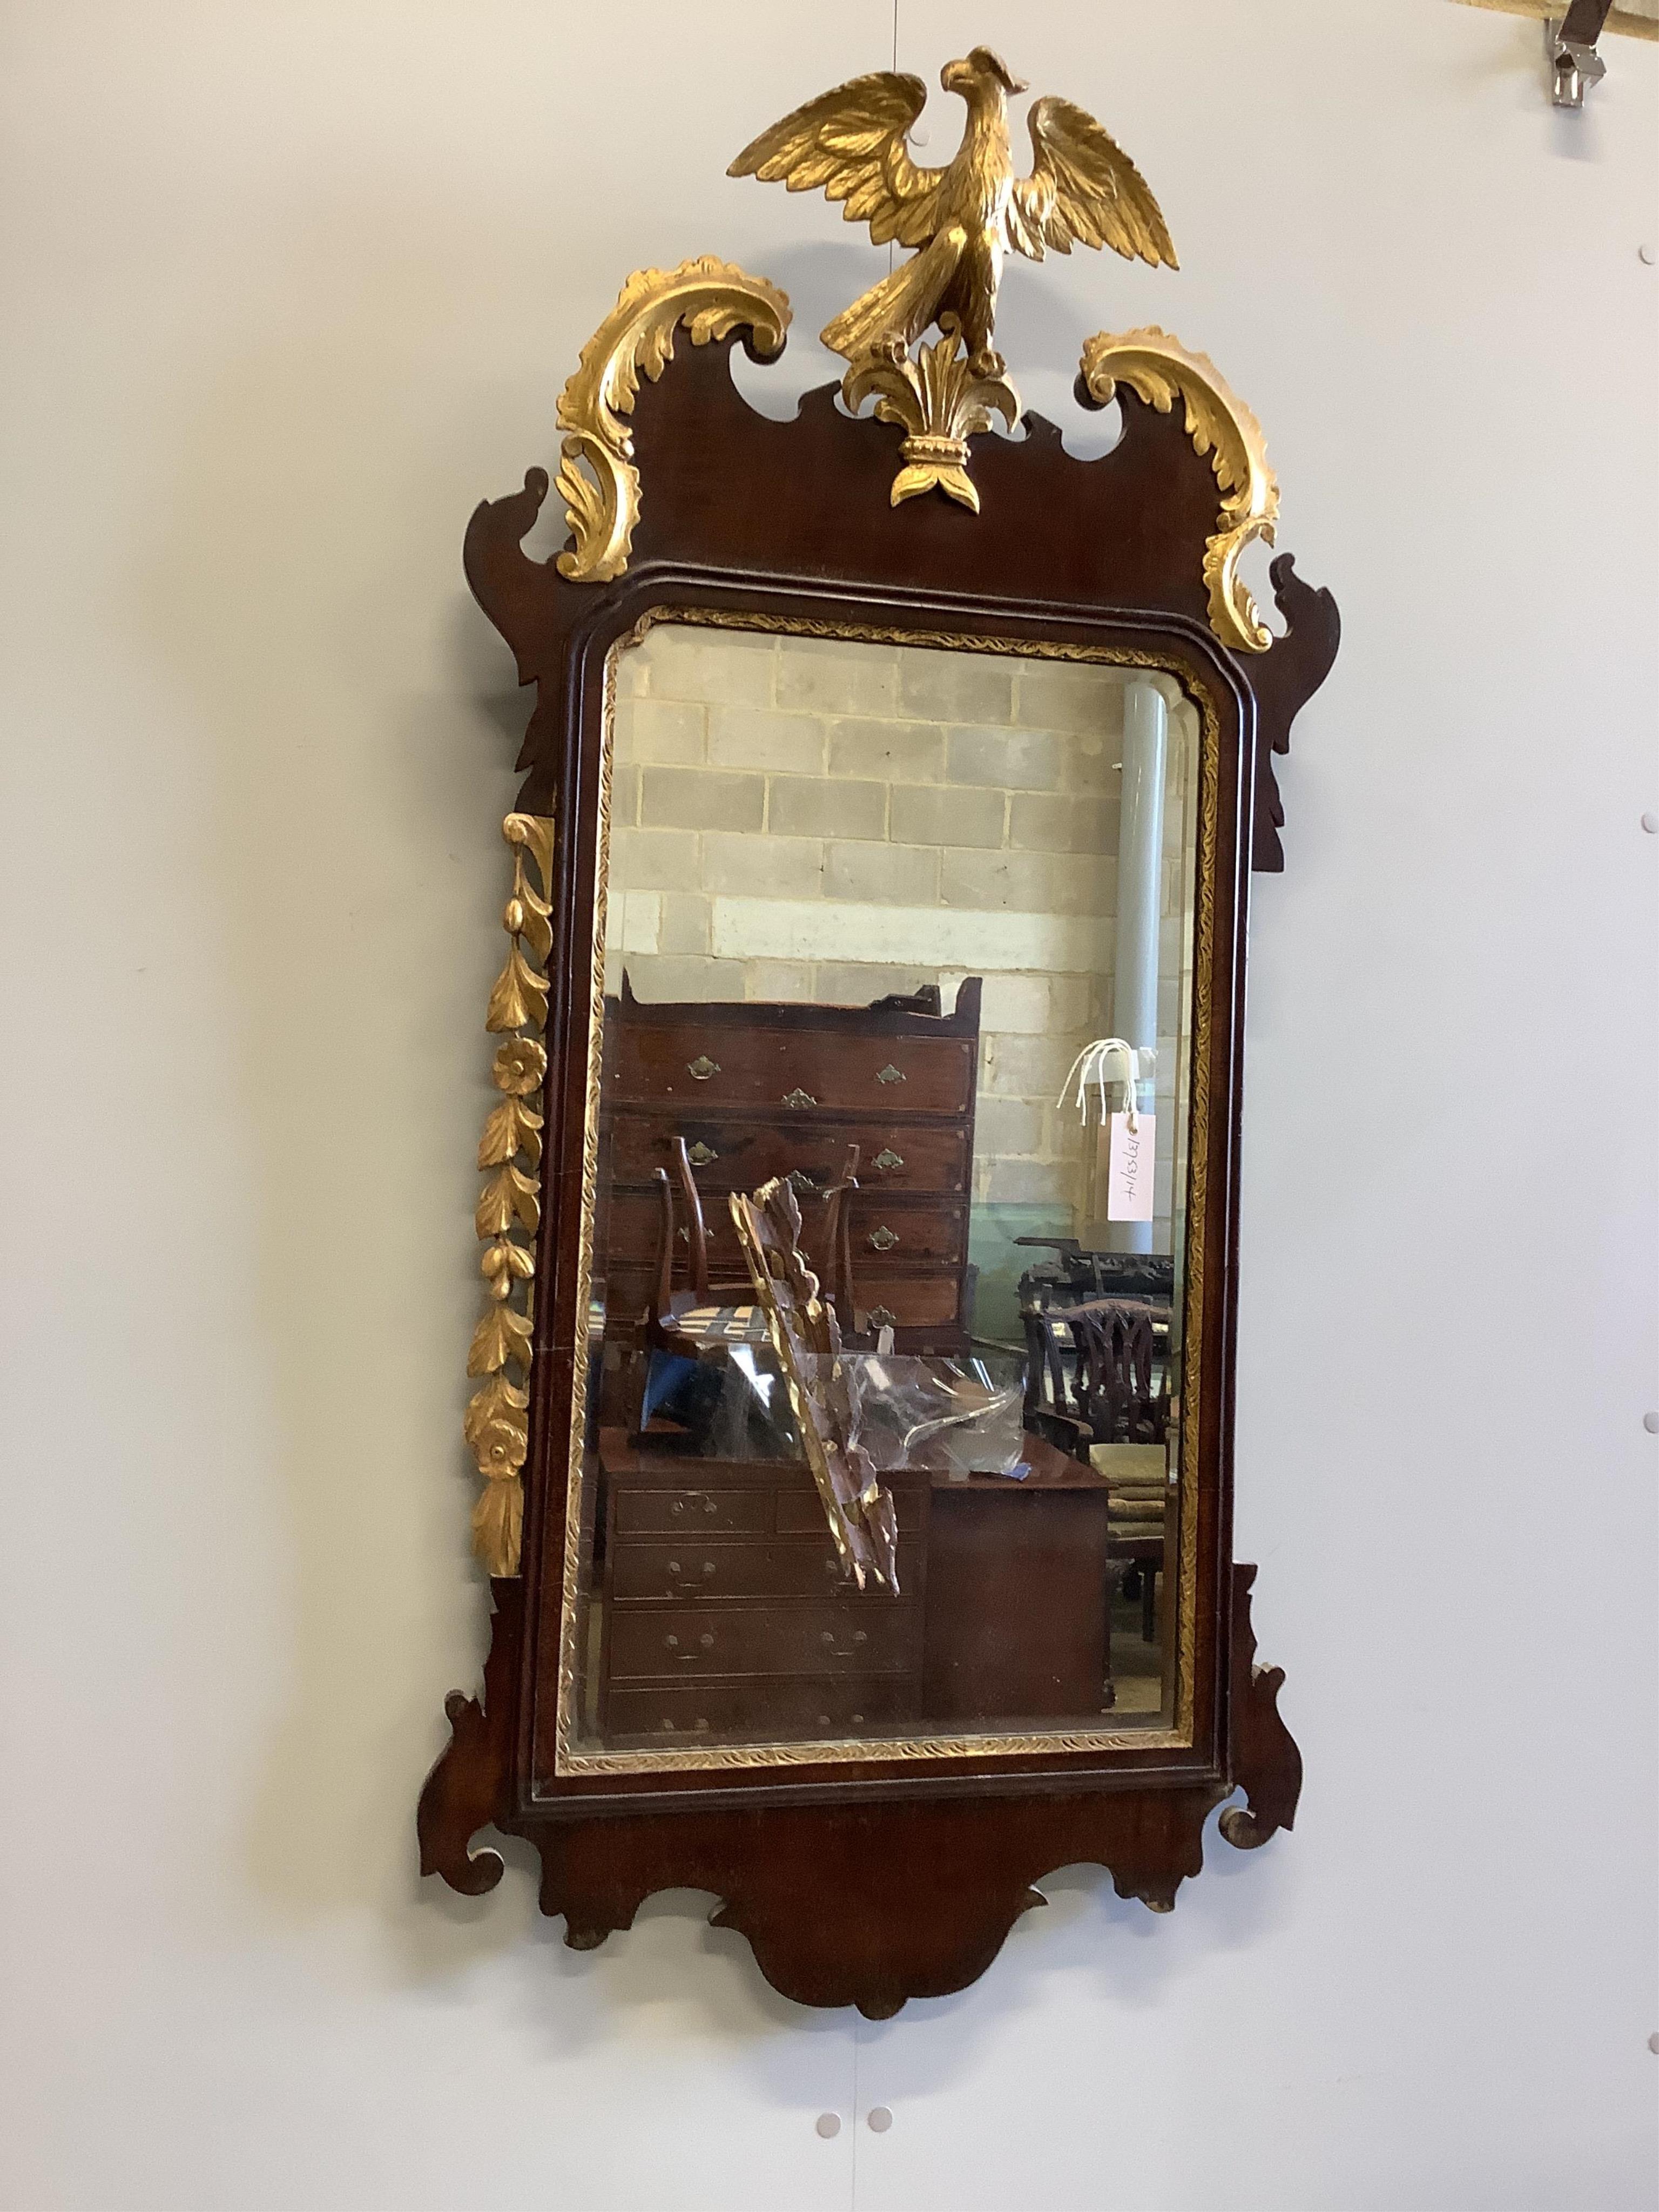 An early 19th century Chippendale design mahogany and parcel gilt fret carved pier glass, having